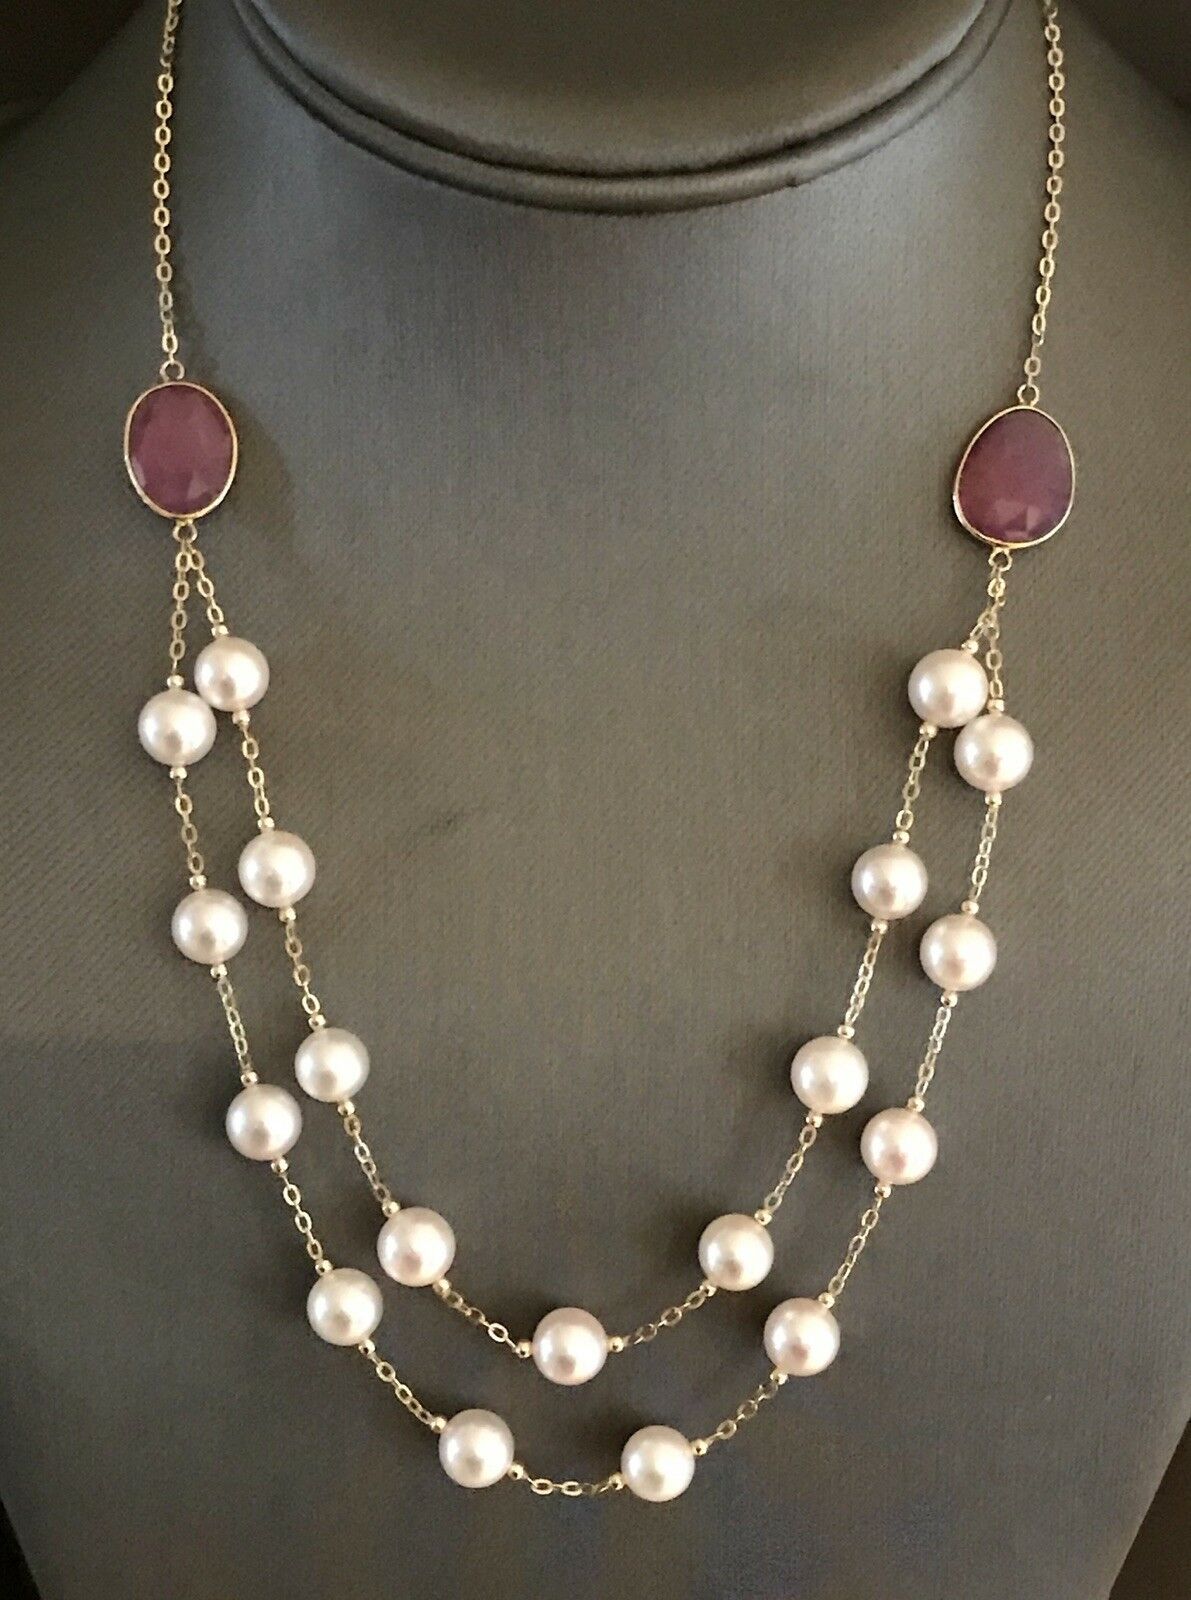 Akoya Pearl Ruby Necklace 14k Gold 7.80 mm 19 3/4" Certified $2,450 820424 - Certified Estate Jewelry